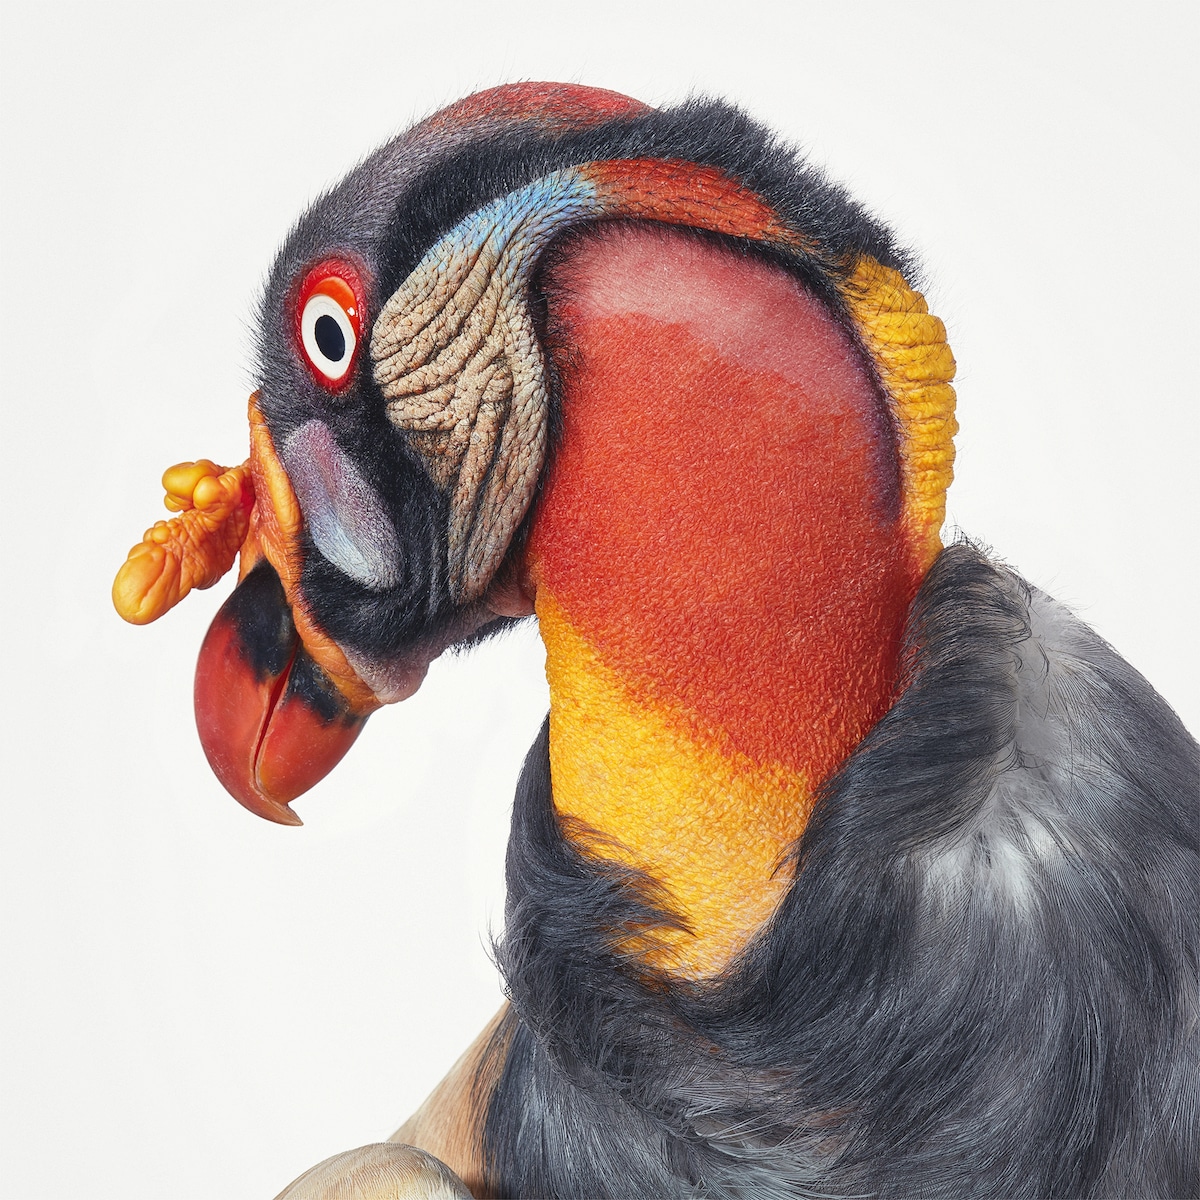 King Vulture by Tim Flach